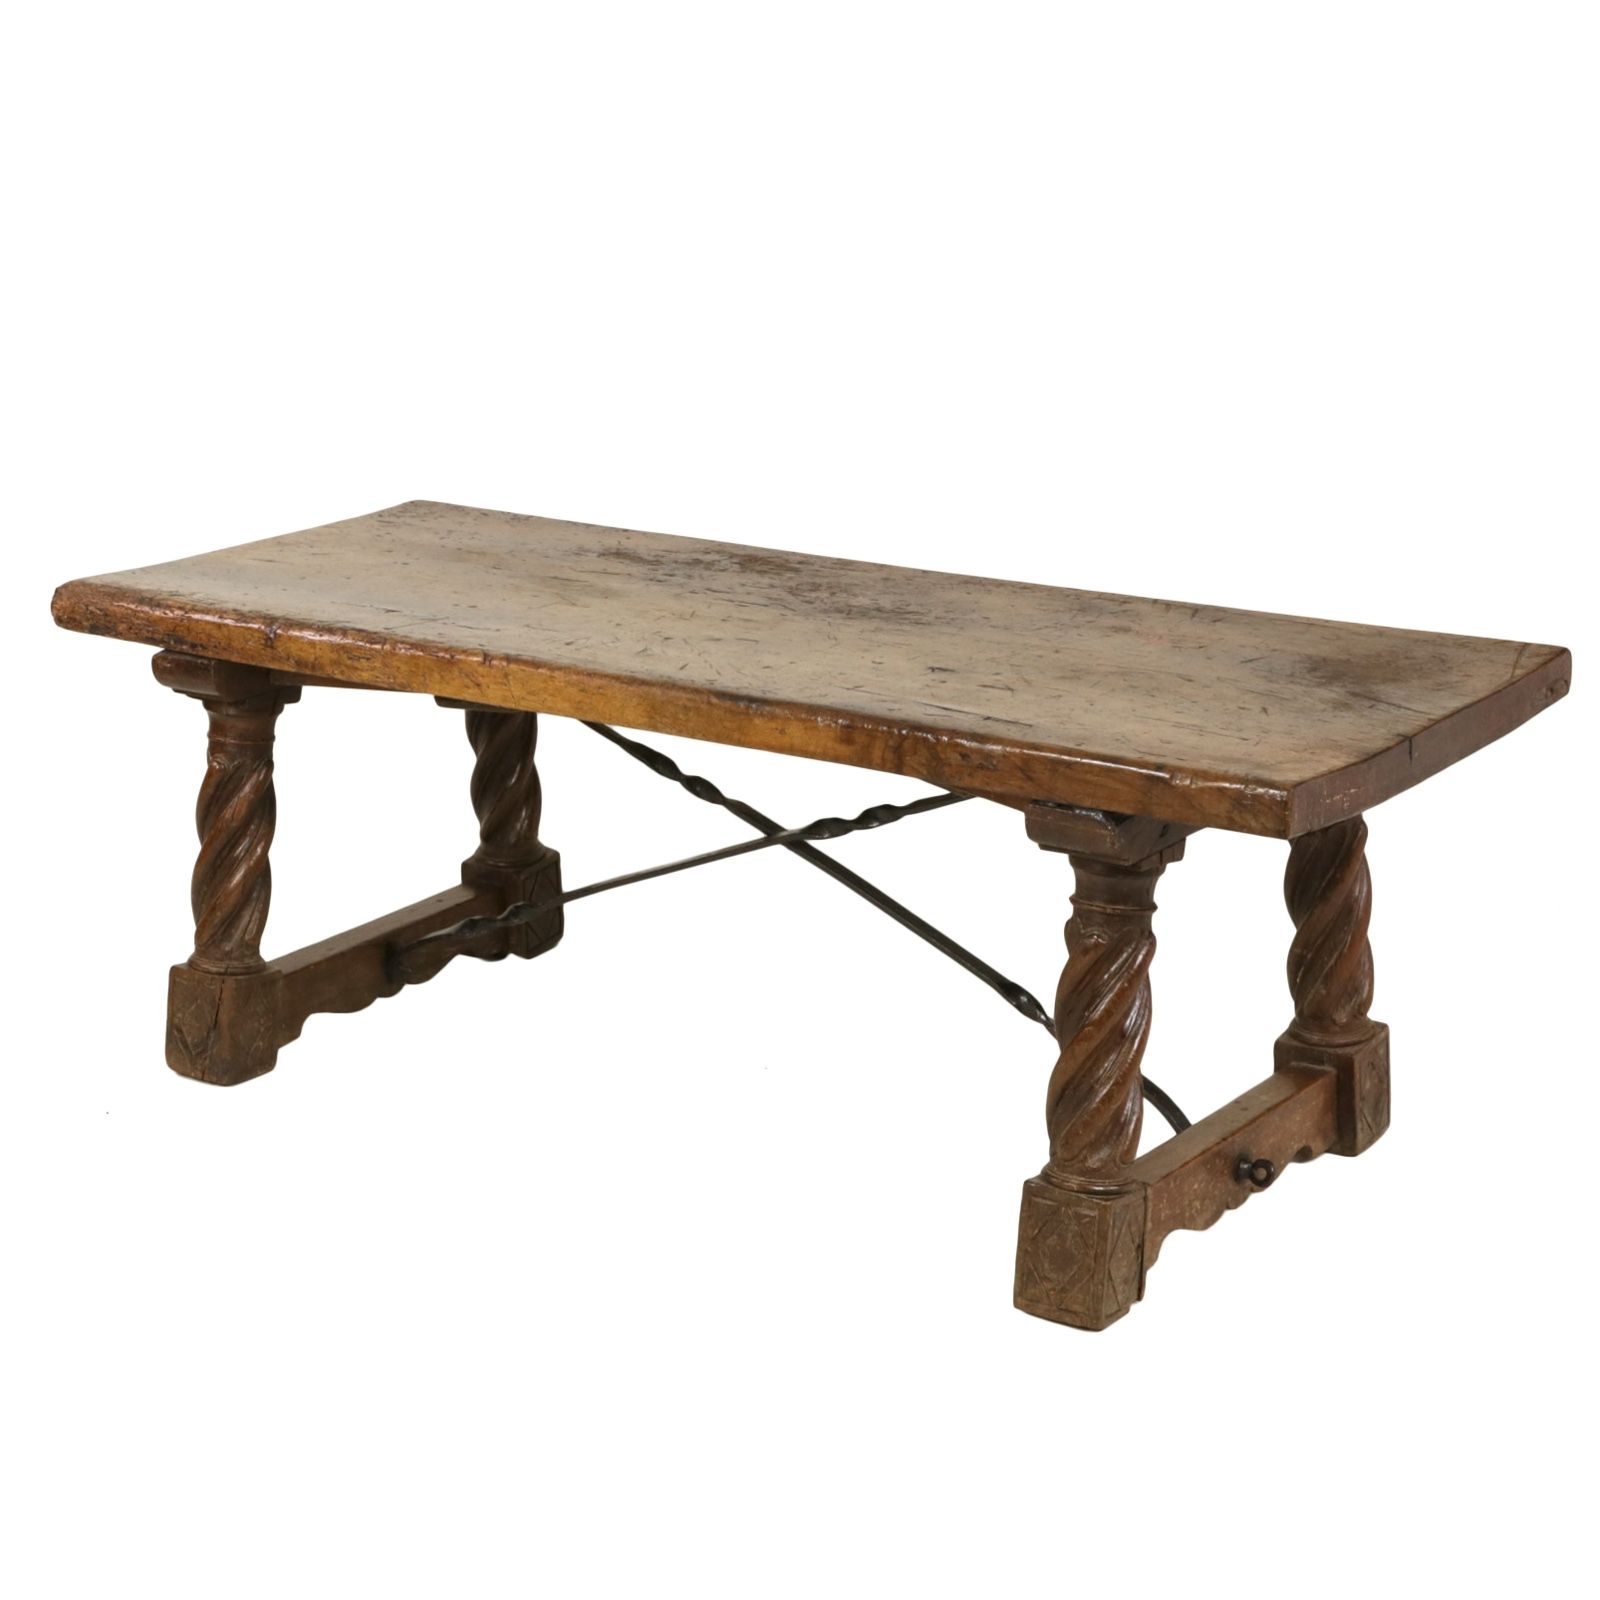 Antique Walnut Low Table, Italian, Circa 1800 (415) 355 1690 With Regard To Barley Twist Coffee Tables (View 24 of 30)